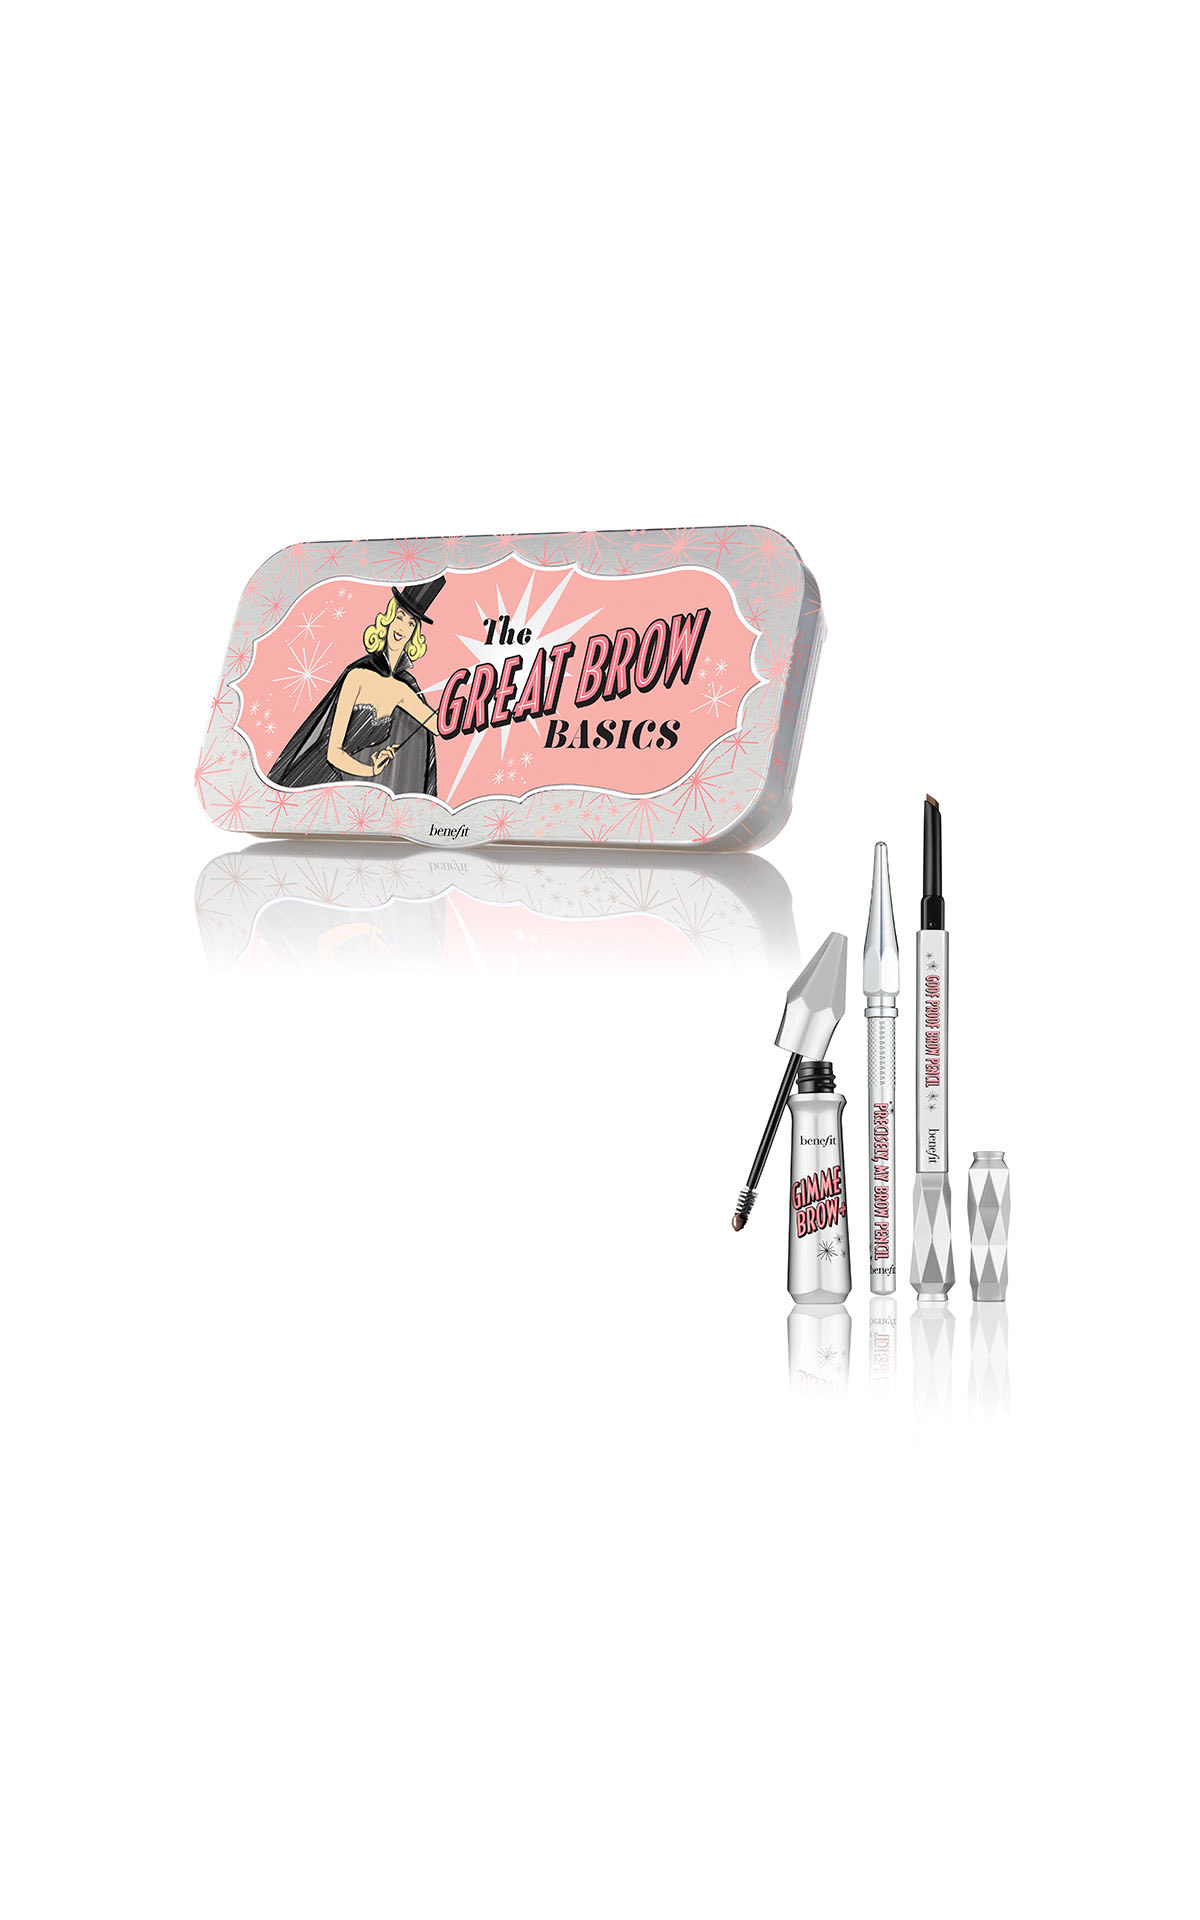 Benefit Cosmetics The great brow basics from Bicester Village